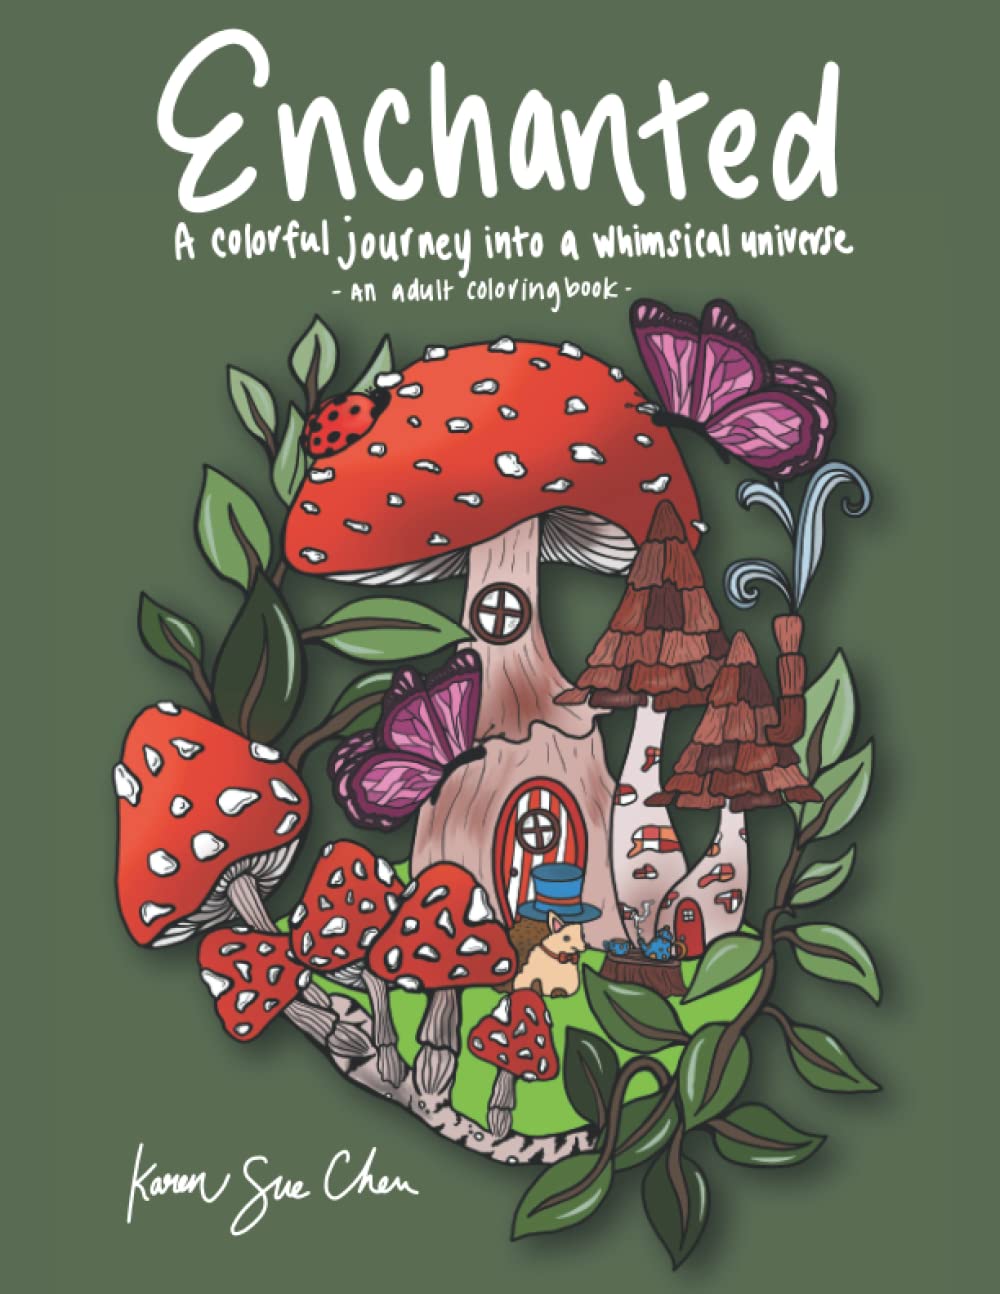 An adult coloring book shows a cartoon world in which mushrooms are houses. Large white letters across the top say Enchanted.